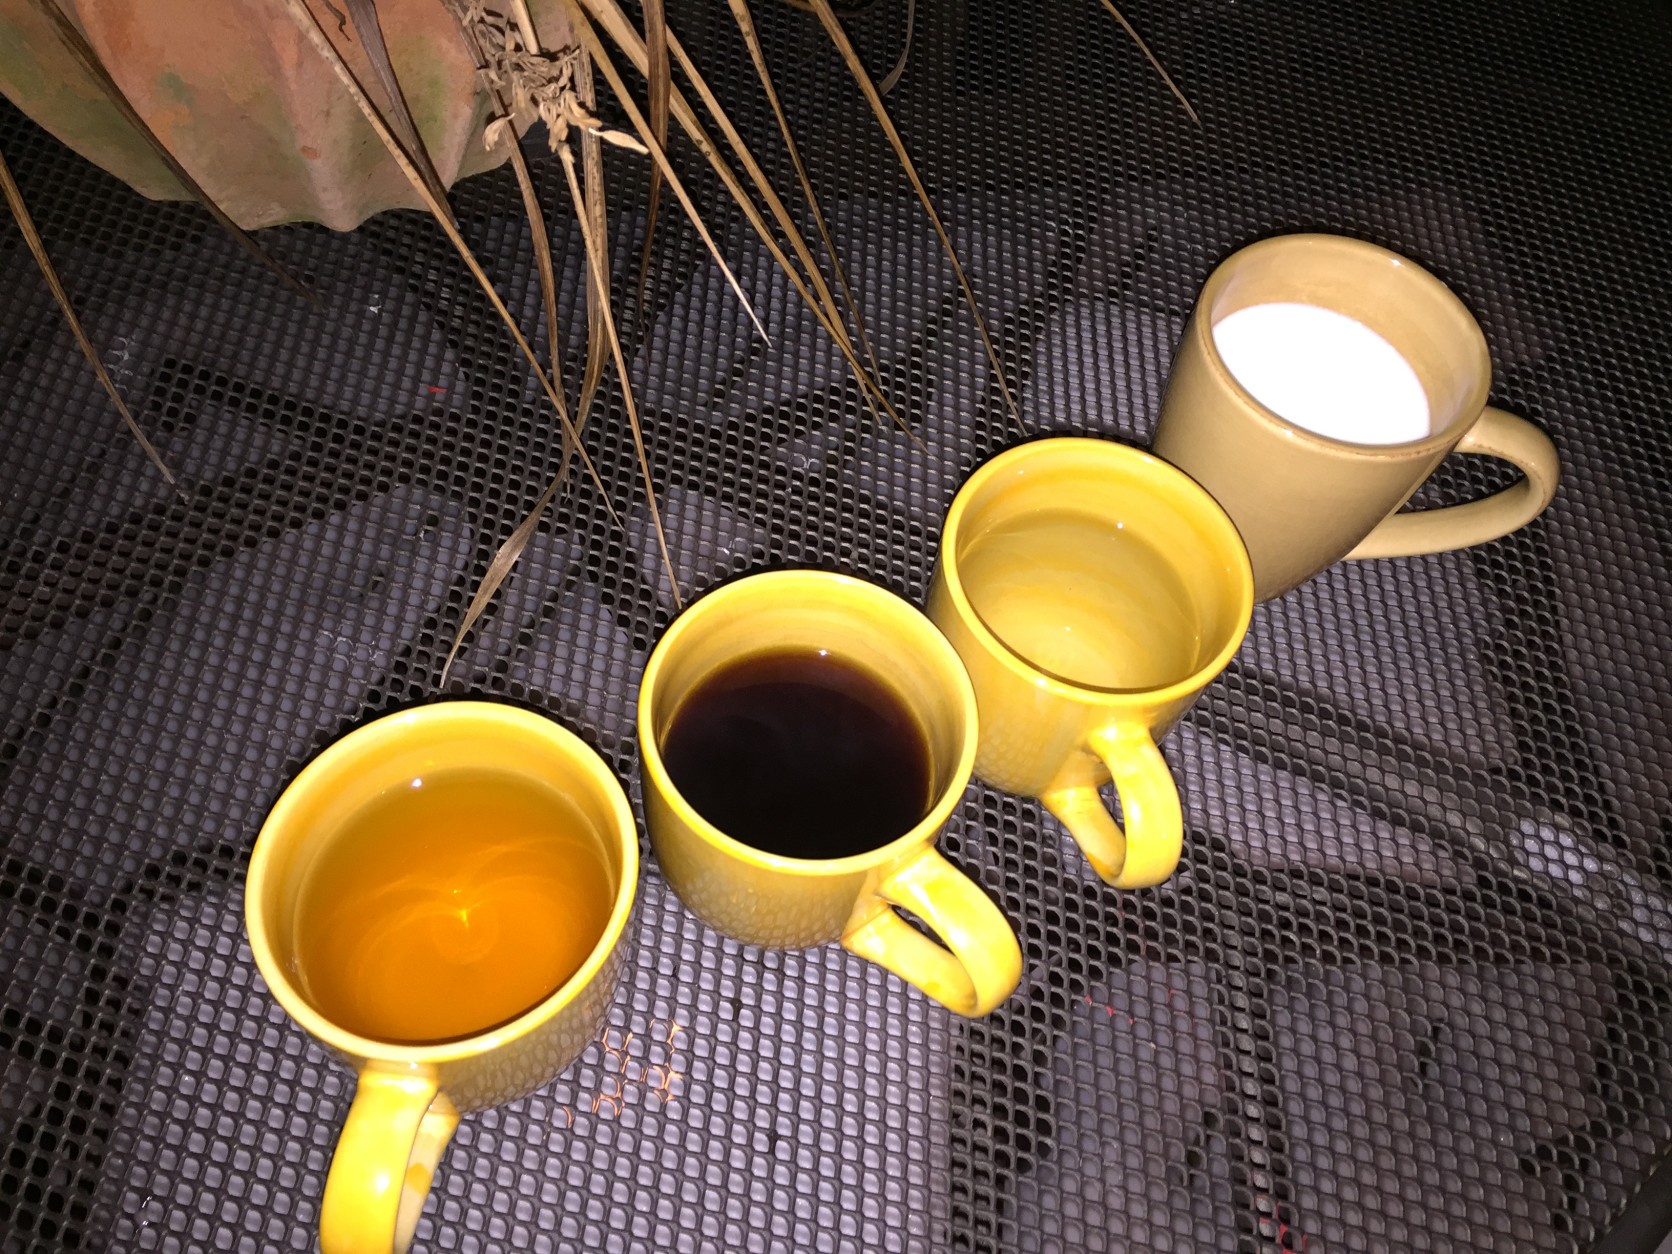 After 10 minutes, the steaming hot cup of black coffee was just warm coffee. (WTOP/Neal Augenstein)